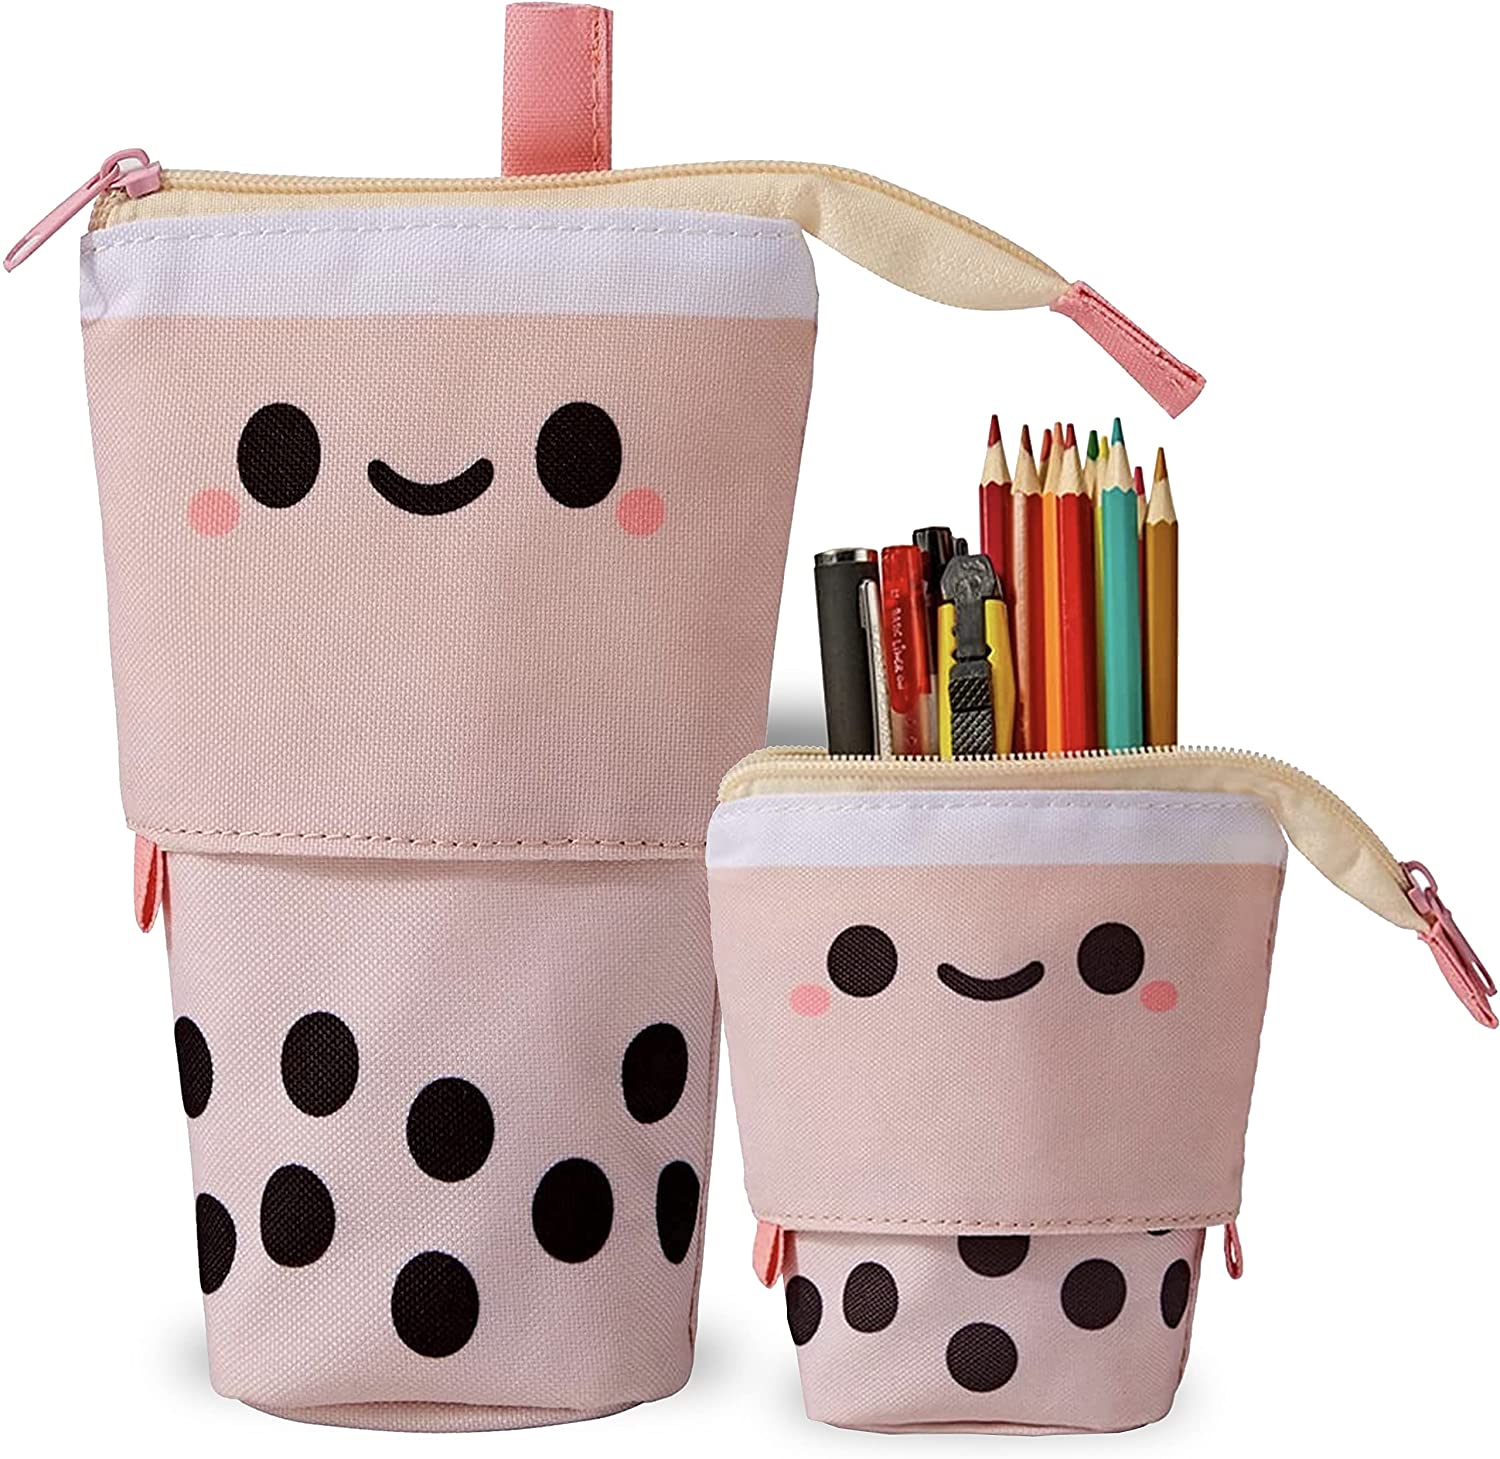 Thalia Cute Bubble Boba Pencil Case Standing Pen Holder Telescopic Makeup  Pouch Pop Up Cosmetics Bag Stationery Office Organizer Box for Kids Girls